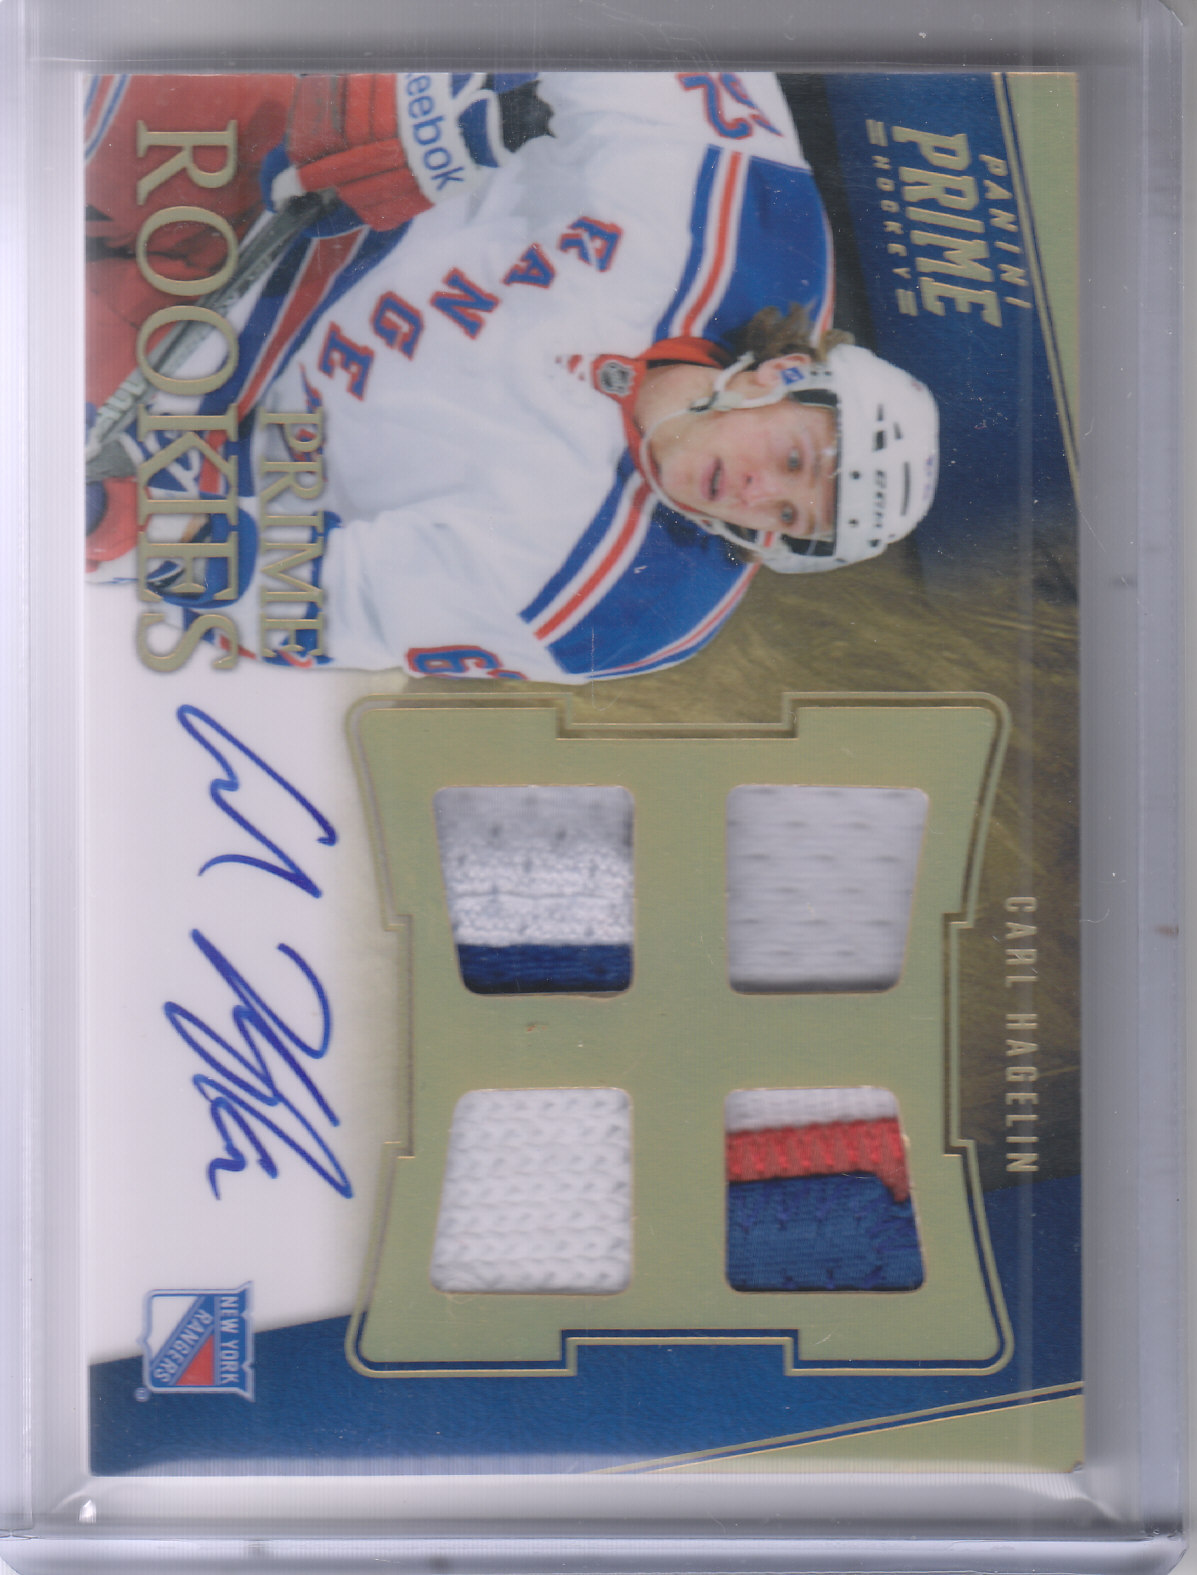 2011-12 Panini Prime Rookies Hologold Patch Autographs #138 Carl Hagelin